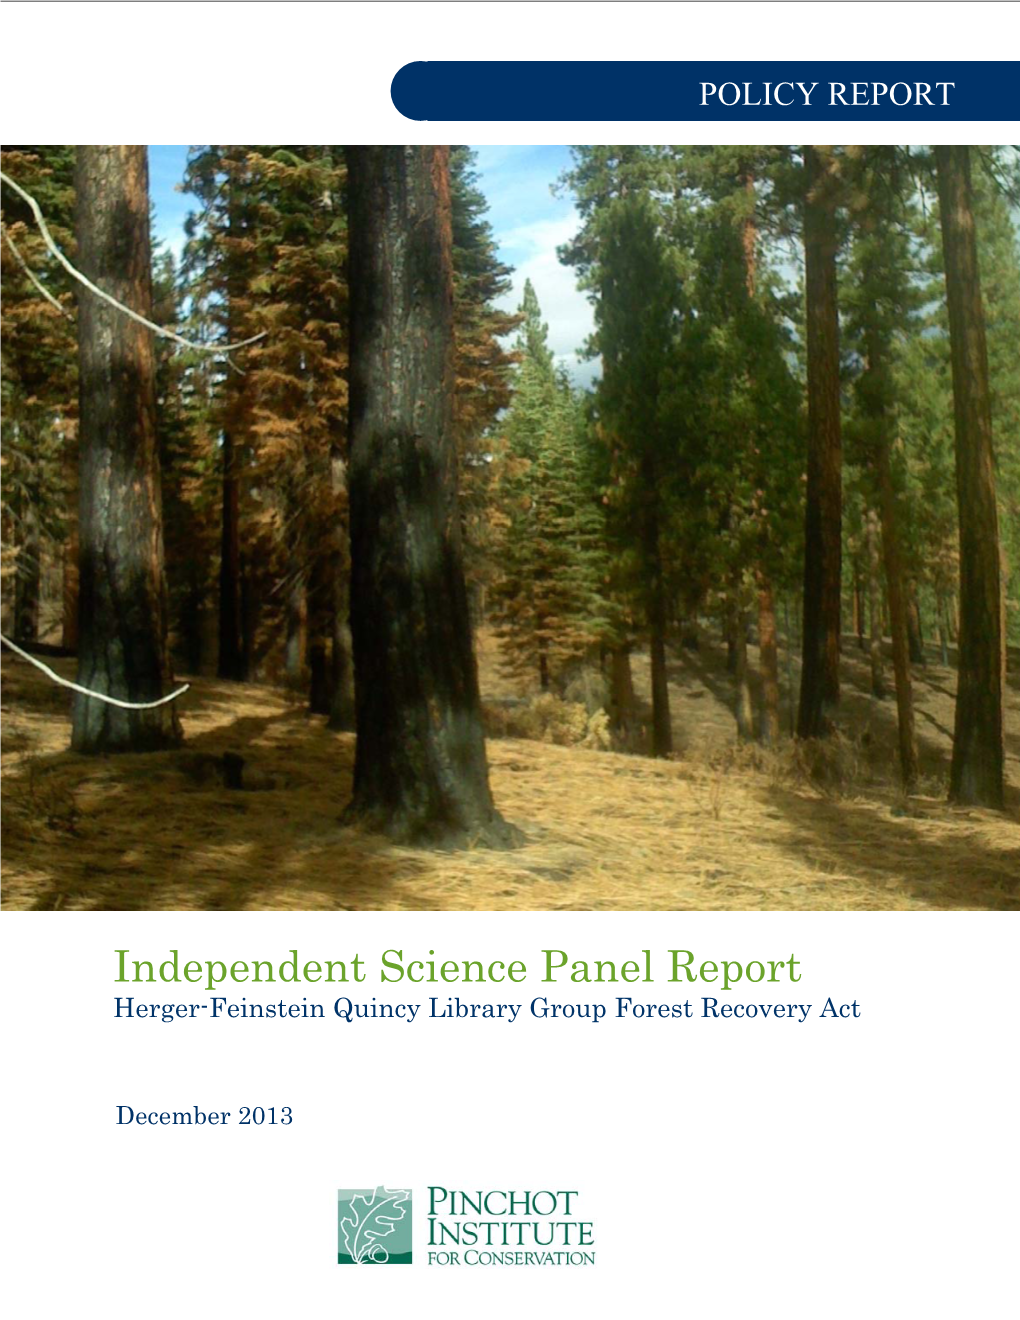 HFQLG Independent Science Panel Report.Pdf